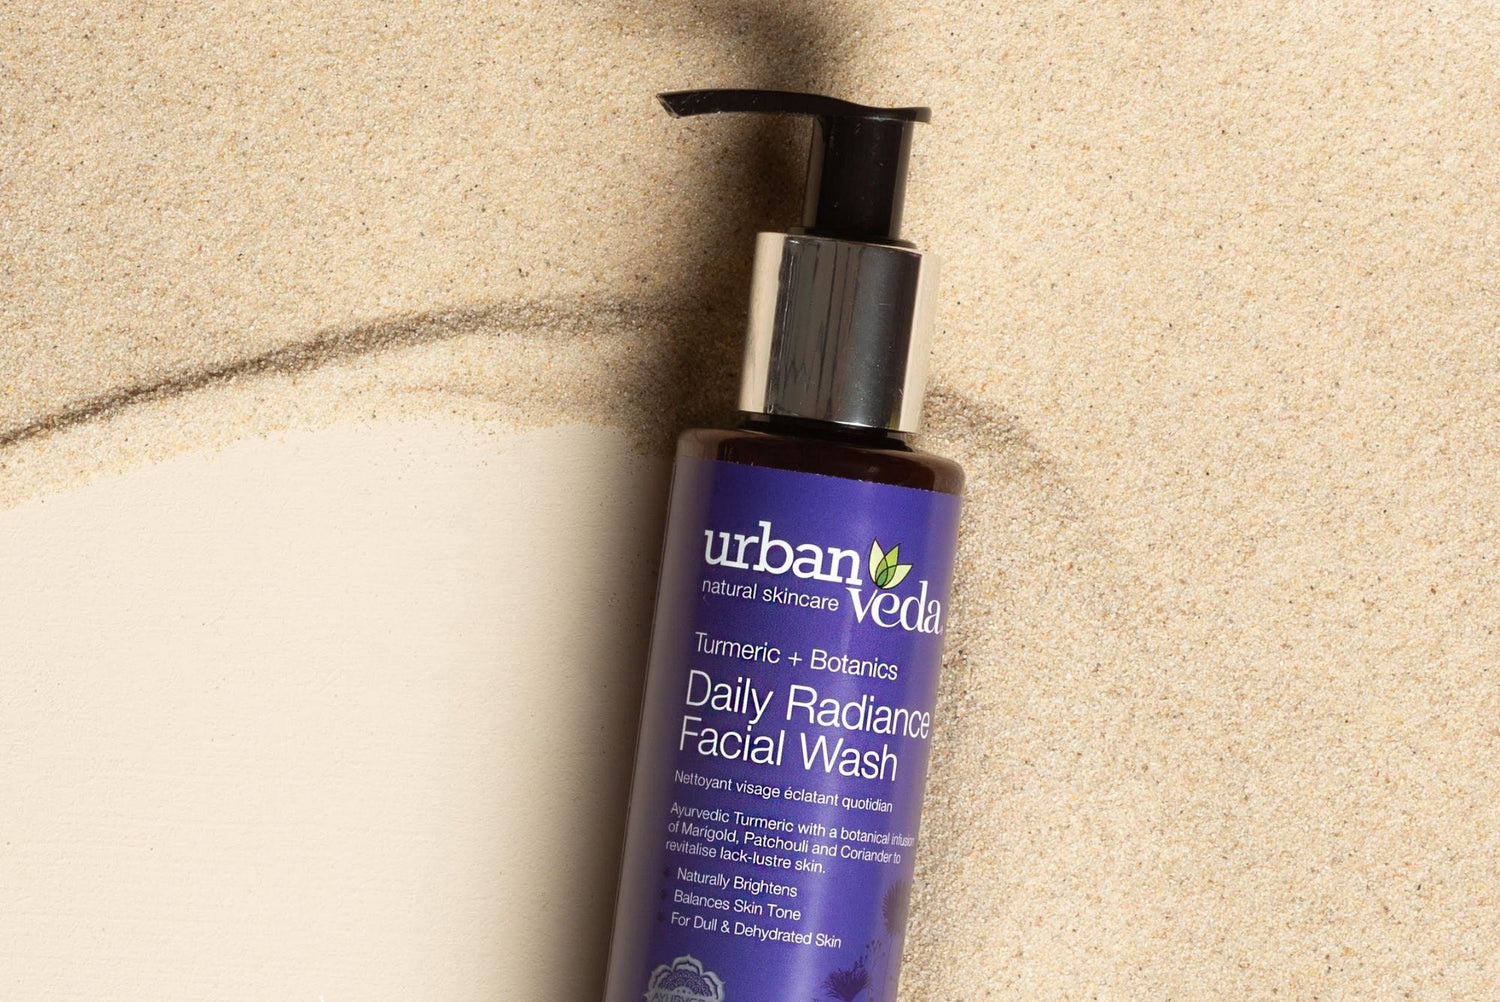 How to restore skin microbiome with the Urban Veda Radiance Daily Facial Polish